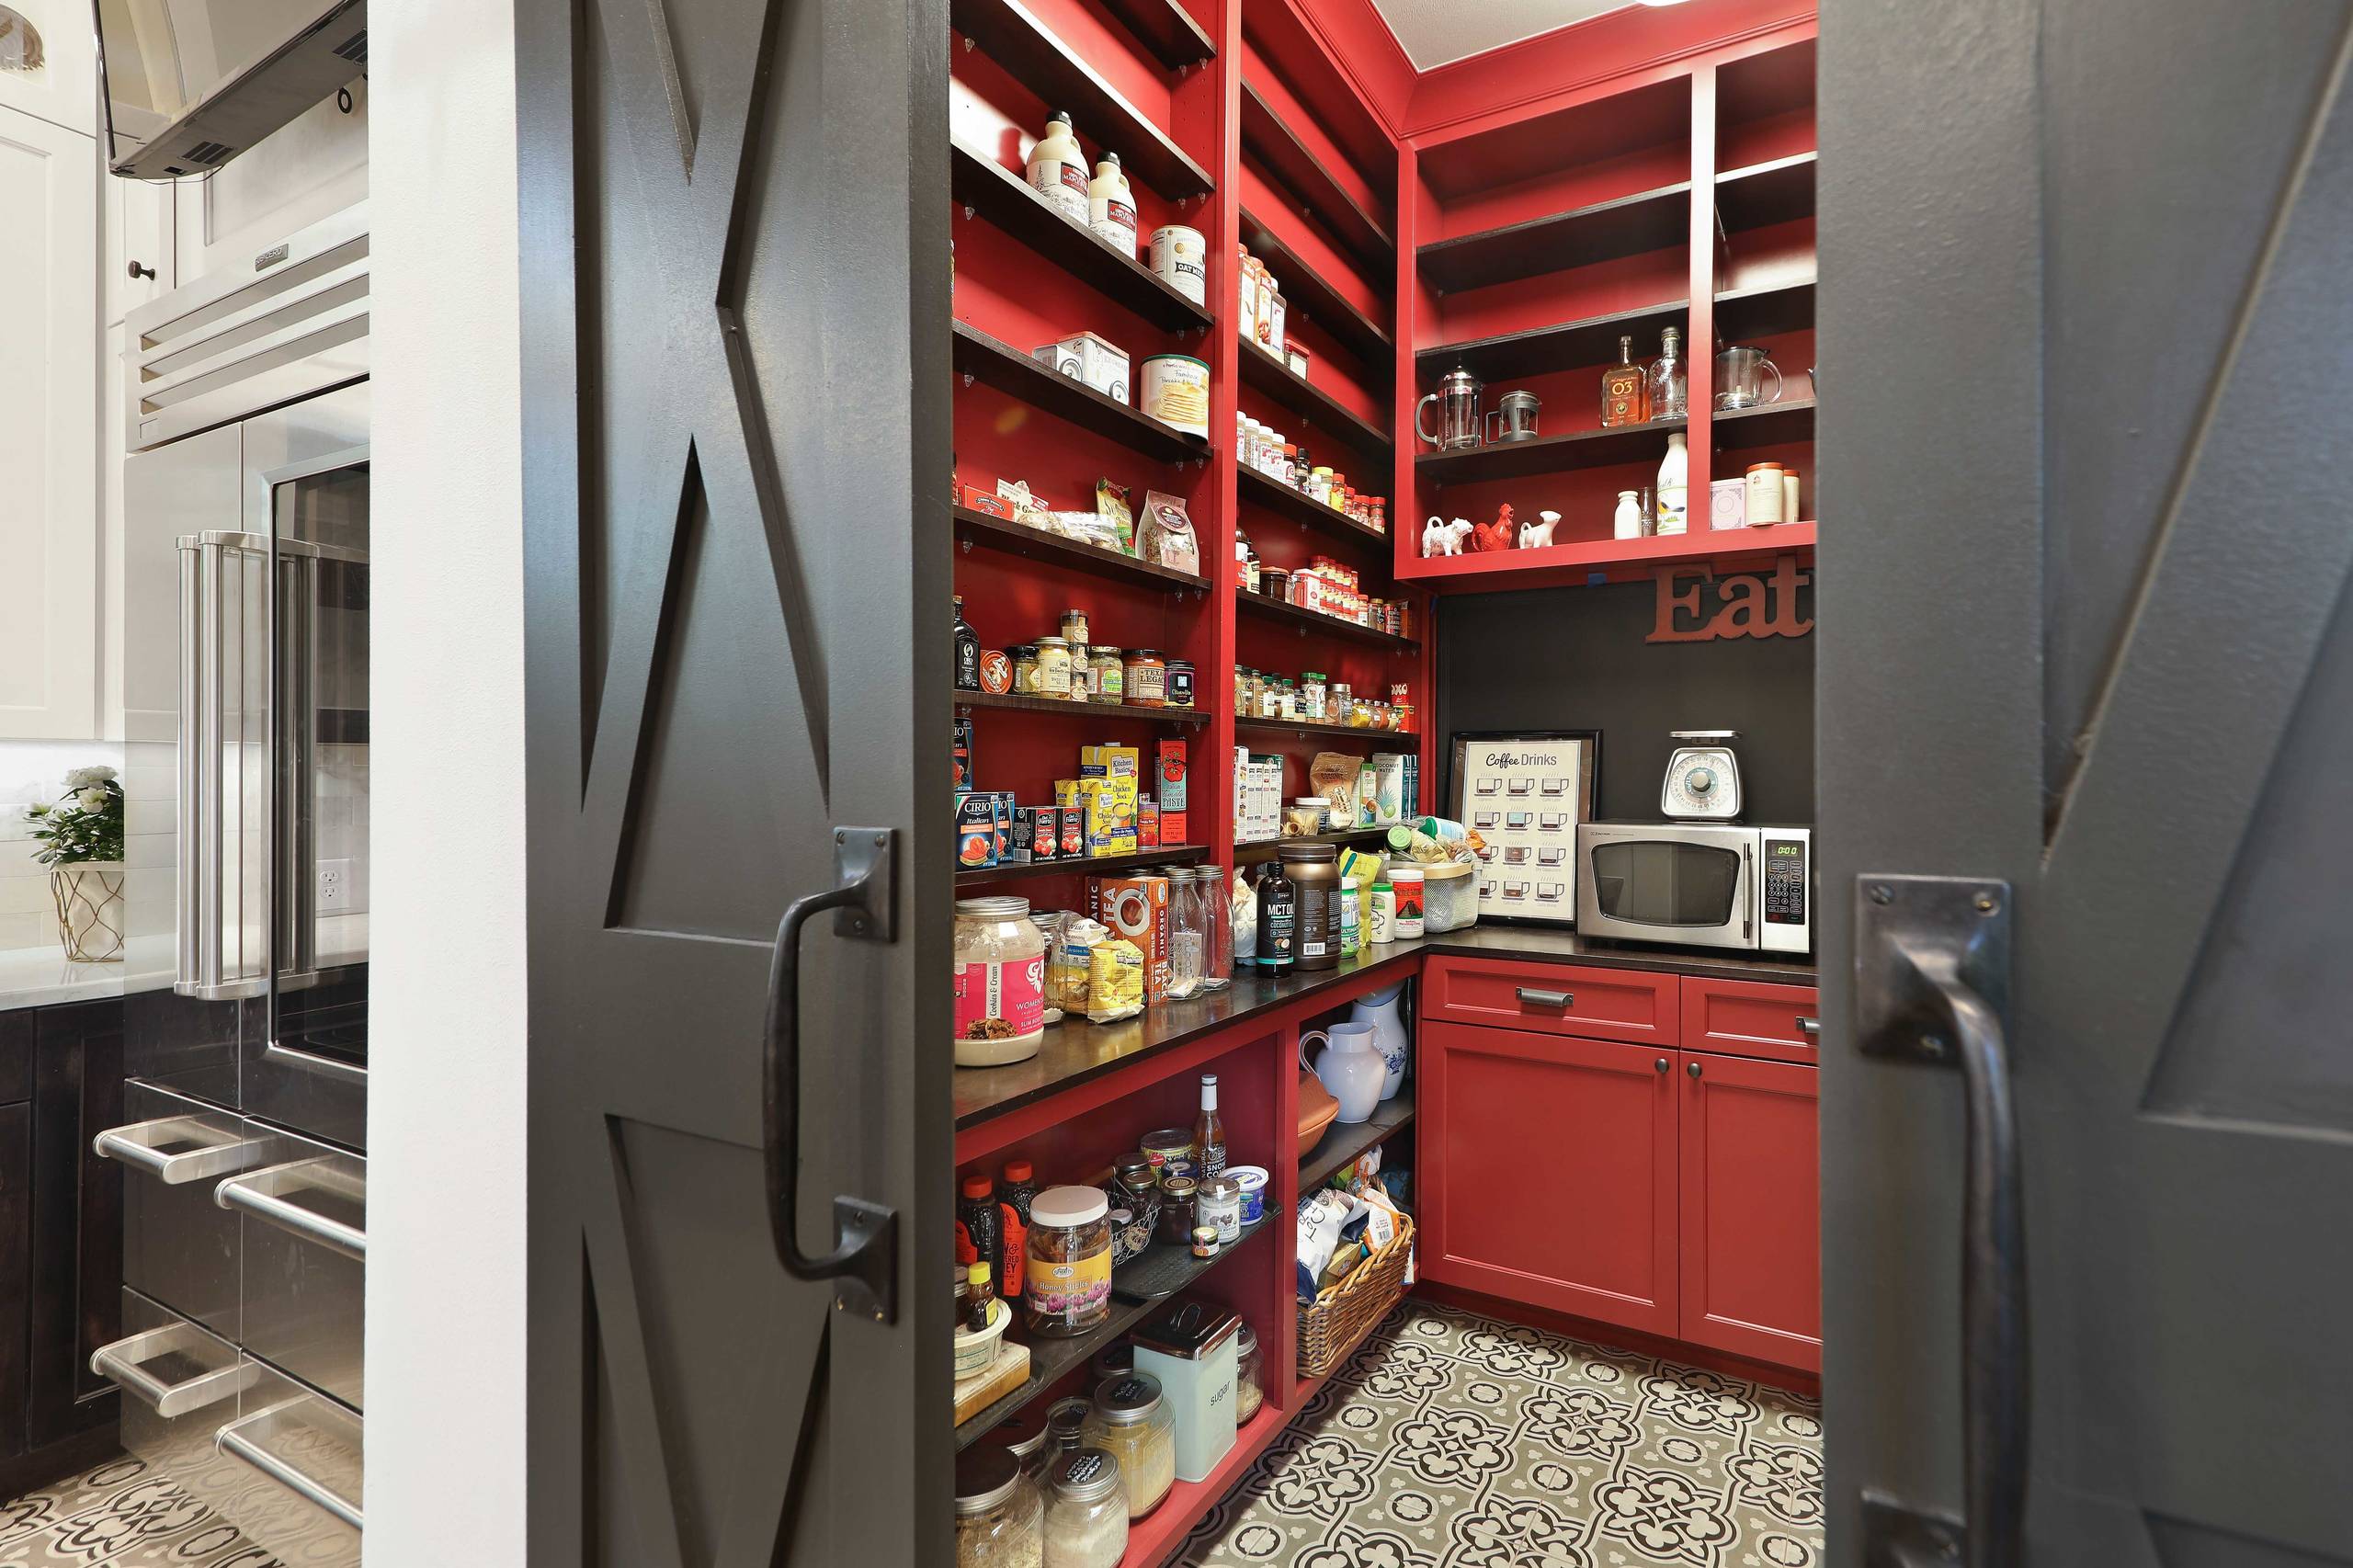 75 Small Red Kitchen Ideas You'll Love - January, 2024